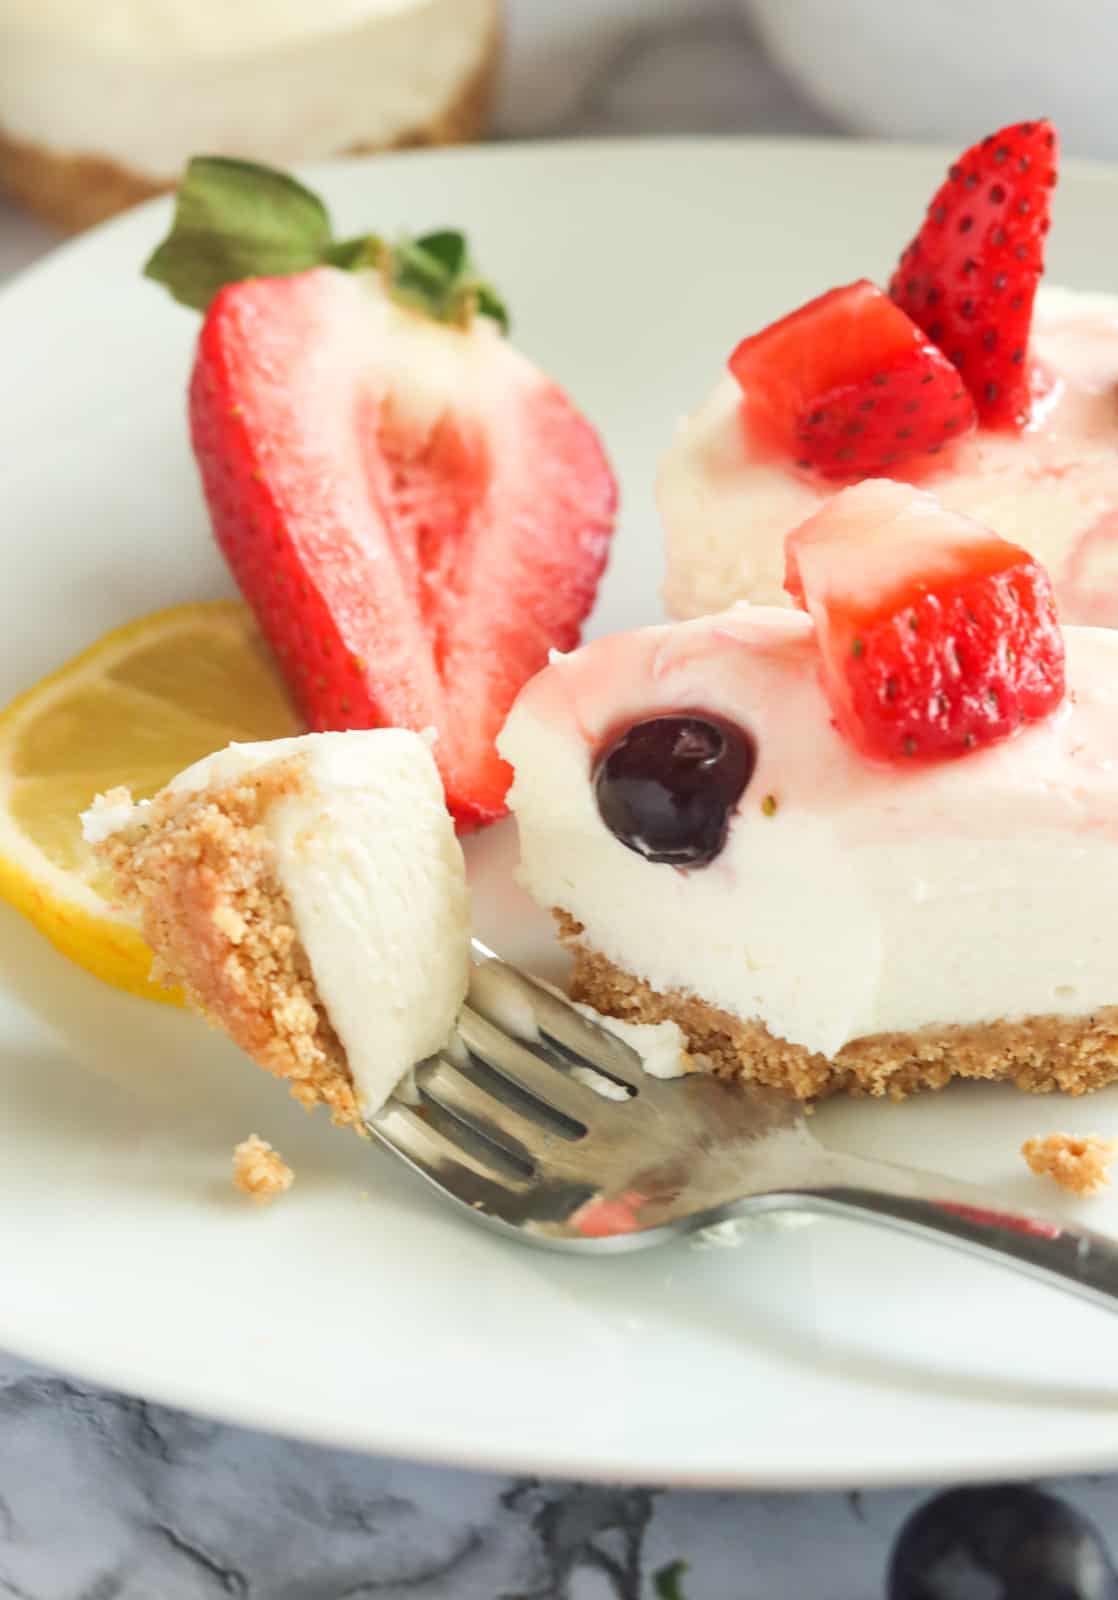 Slicing off a bite of insanely delicious no-bake cheesecake bites with berries and cherries